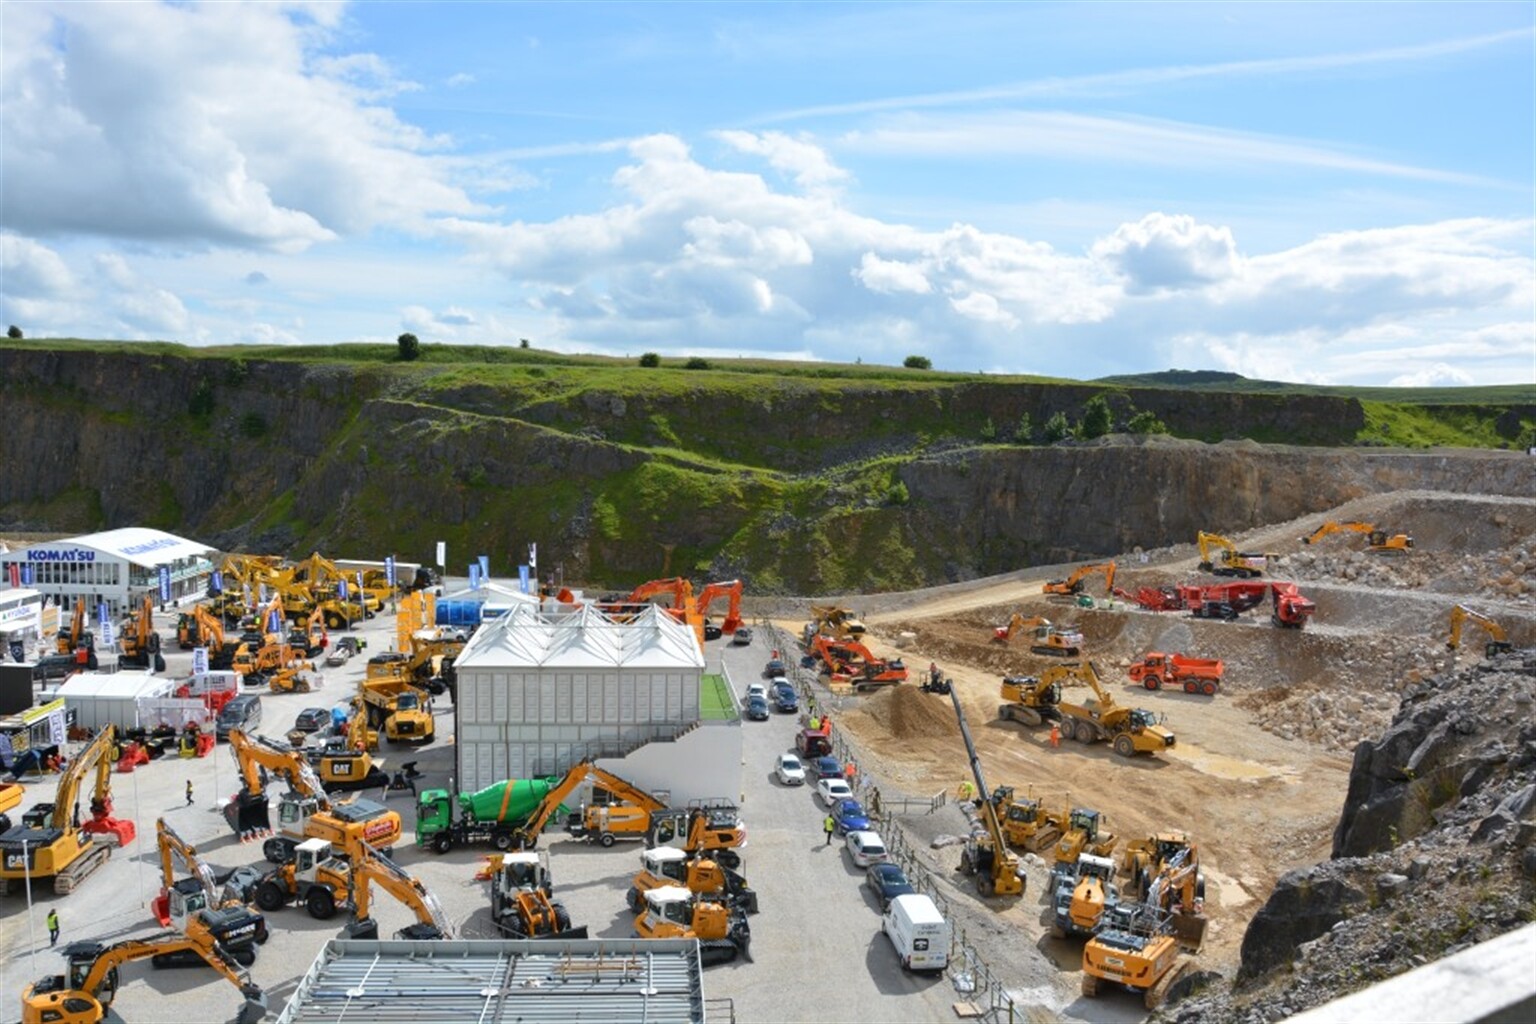 Diggers Hillhead 2016 highlights (Part One)